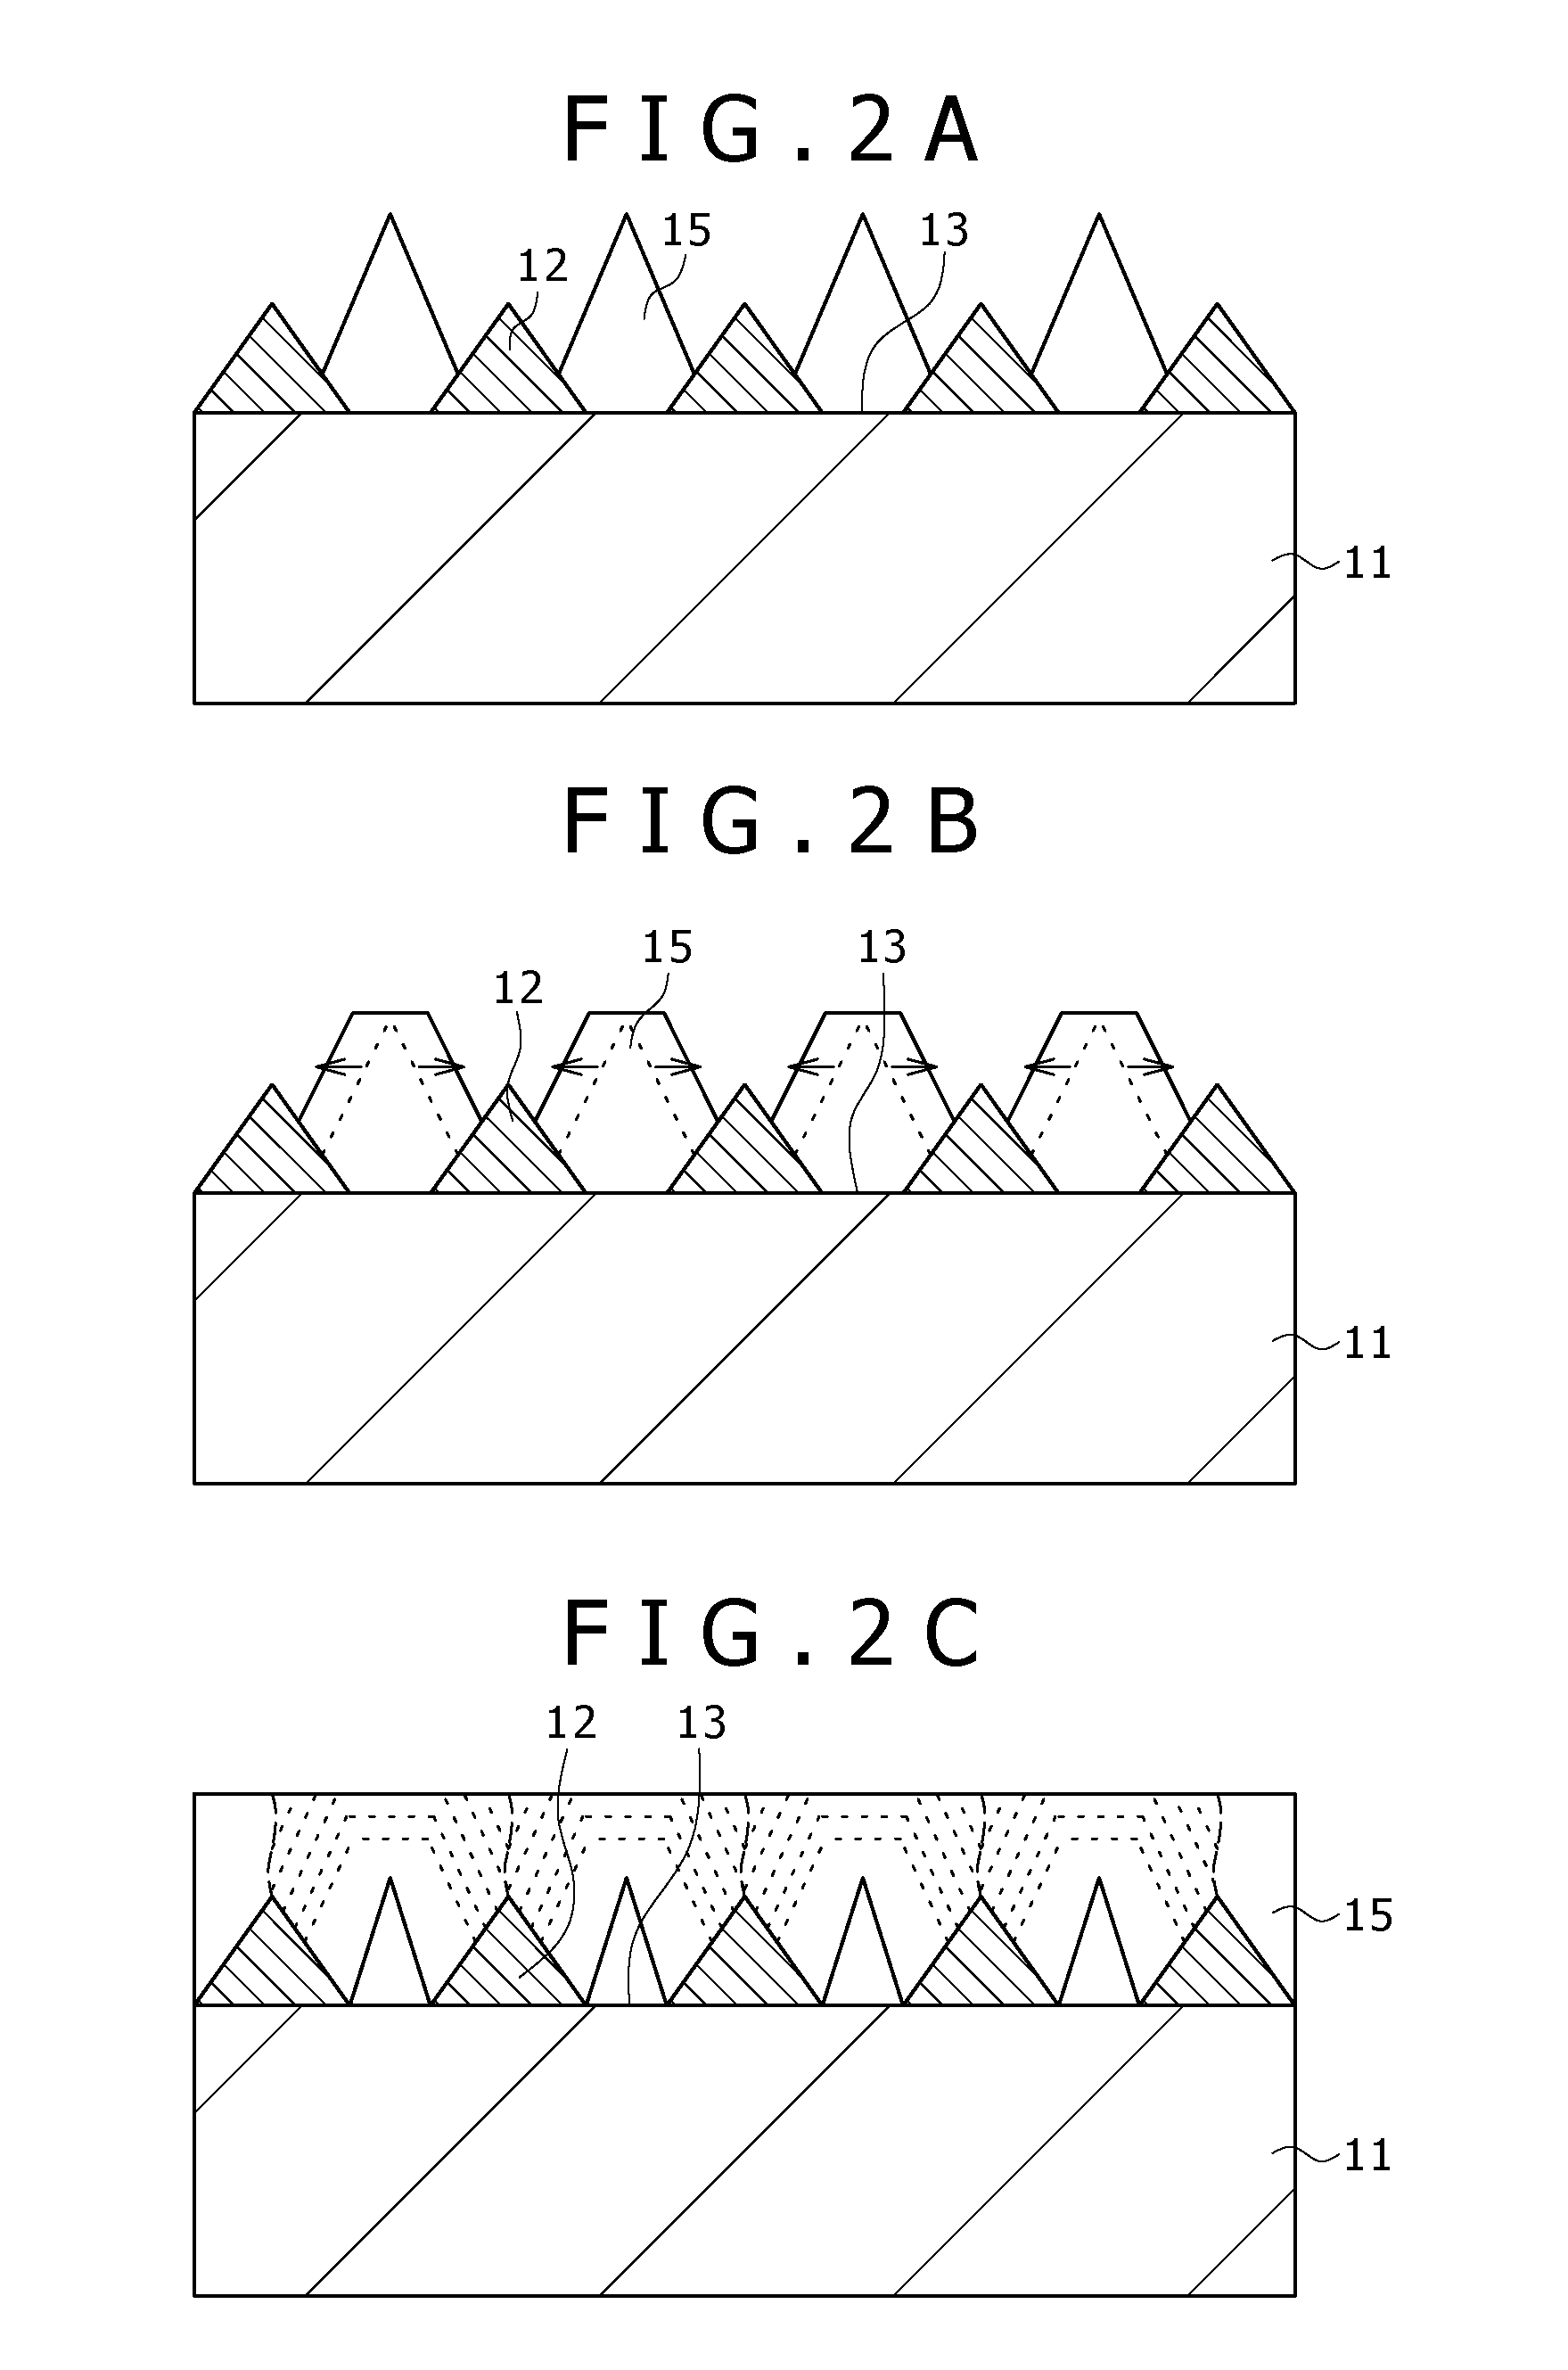 Light-emitting diode and method for manufacturing same, integrated light-emitting diode and method for manufacturing same, method for growing a nitride-based iii-v group compound semiconductor, substrate for growing a nitride-based iii-v group compound semiconductor, light source cell unit, light-emitting diode backlight, light-emitting diode illuminating device, light-emitting diode display and electronic instrument, electronic device and method for manufacturing the same